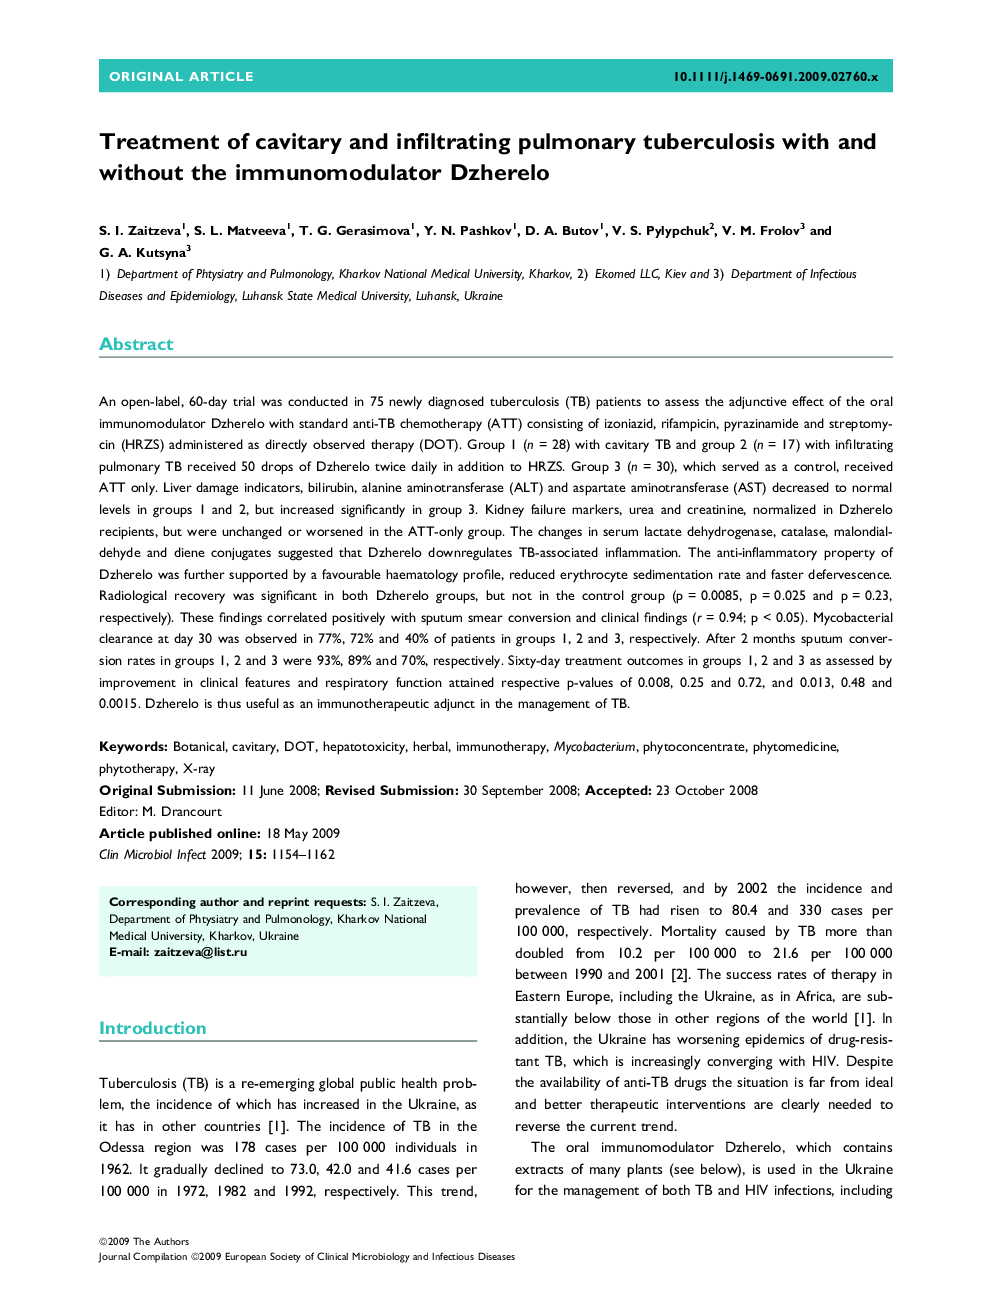 Treatment of cavitary and infiltrating pulmonary tuberculosis with and without the immunomodulator Dzherelo 